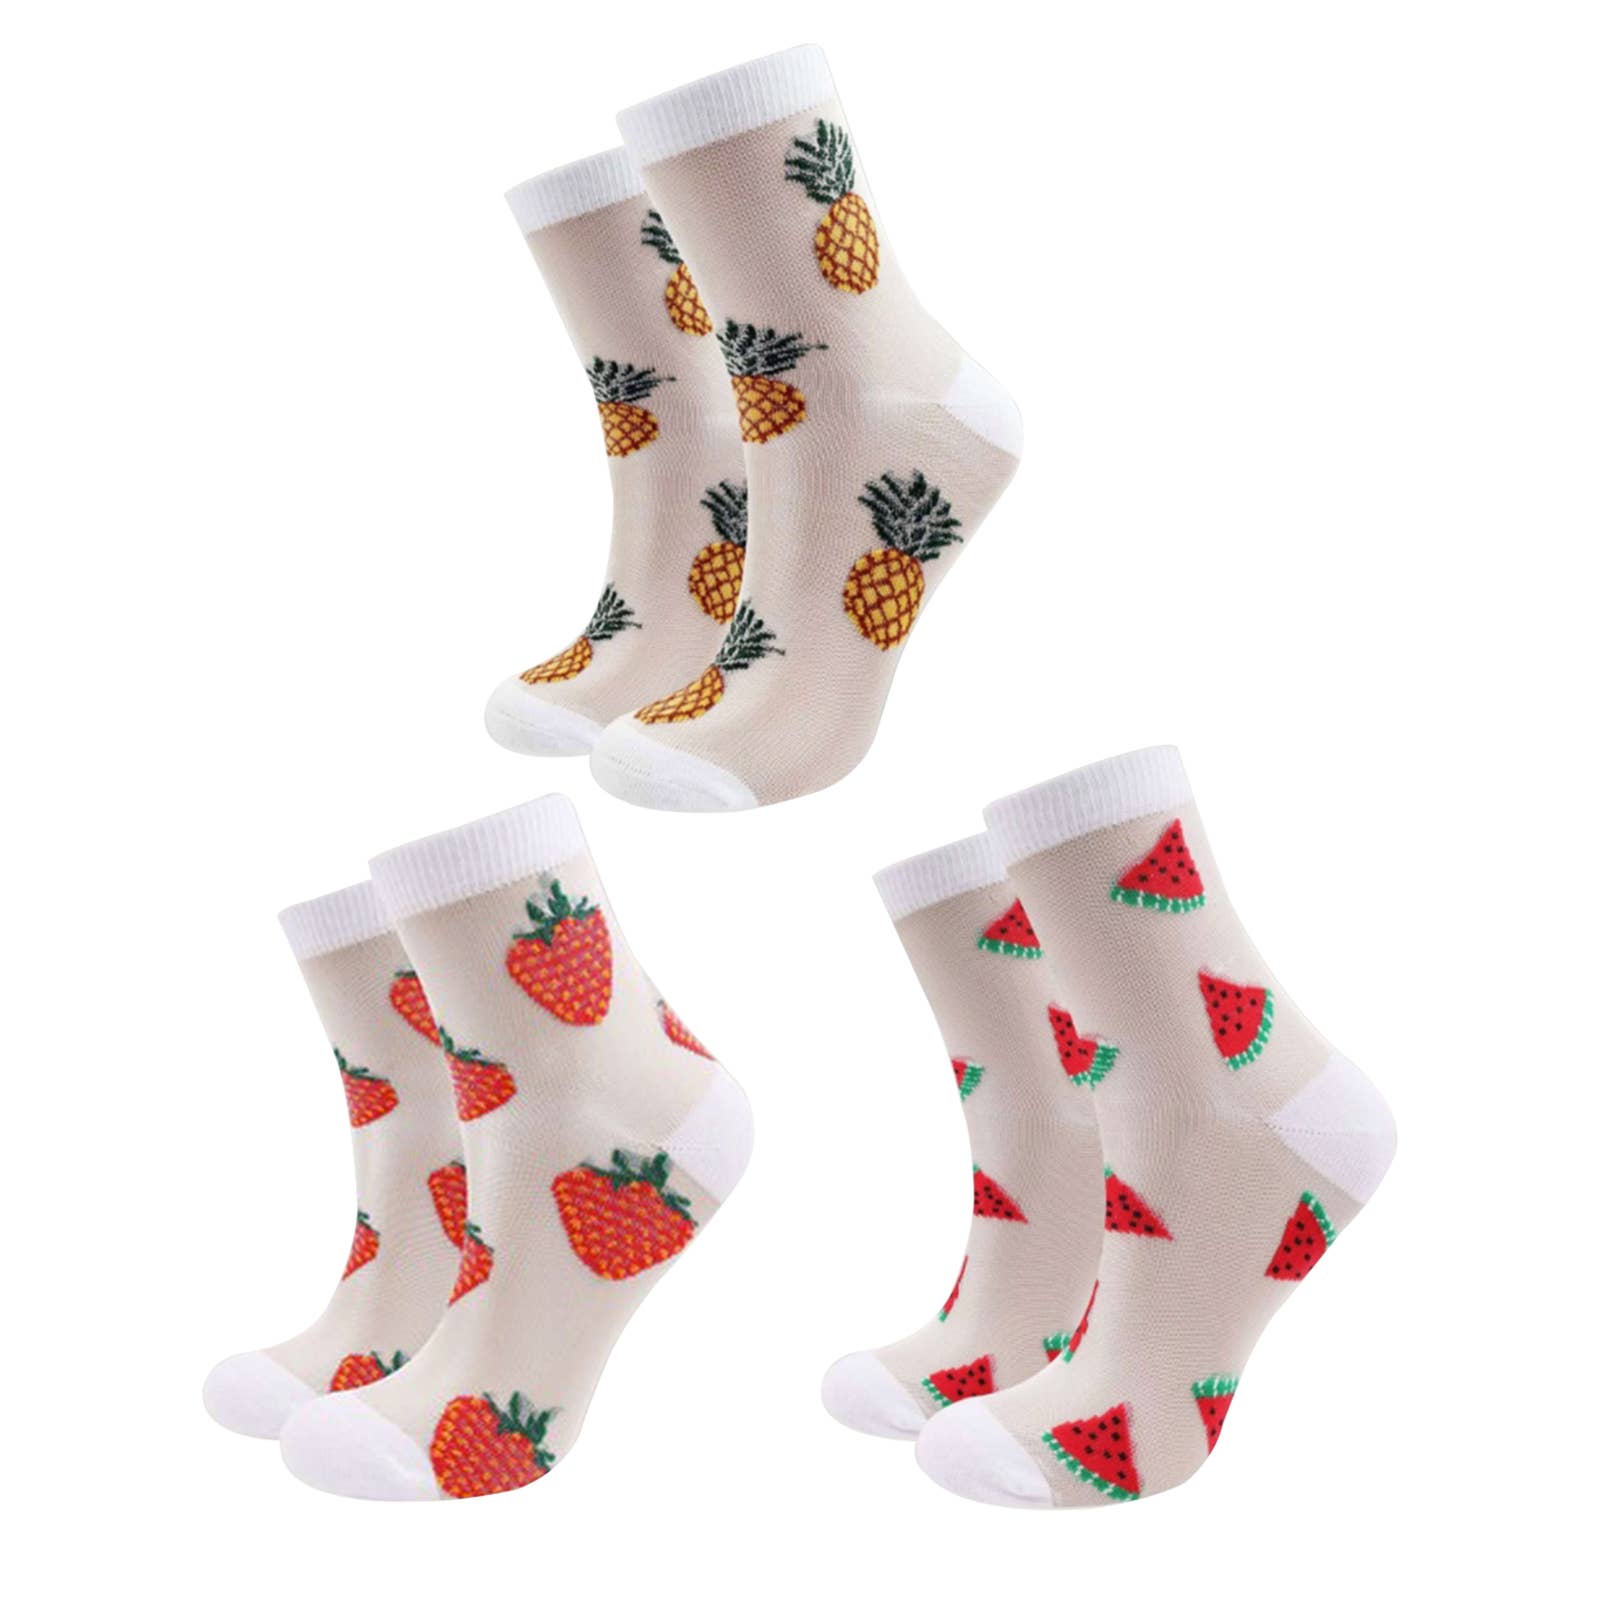 women's white sheer socks with charming fruit embroidery, offering a delightful and whimsical touch to the design